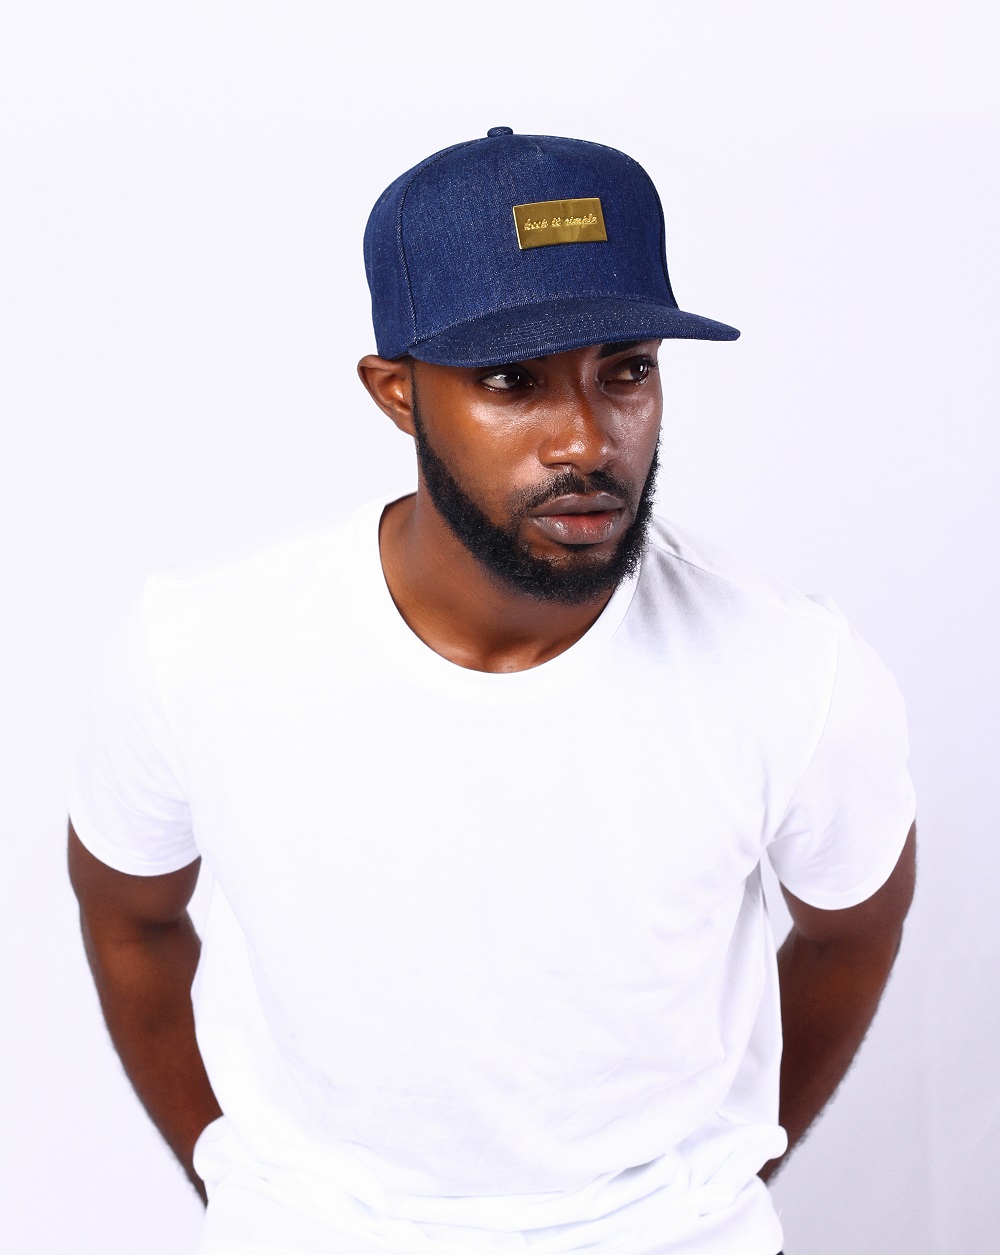 24 Apparel just Unveiled a Cool New Hats Collection Everyone Will Be Coveting